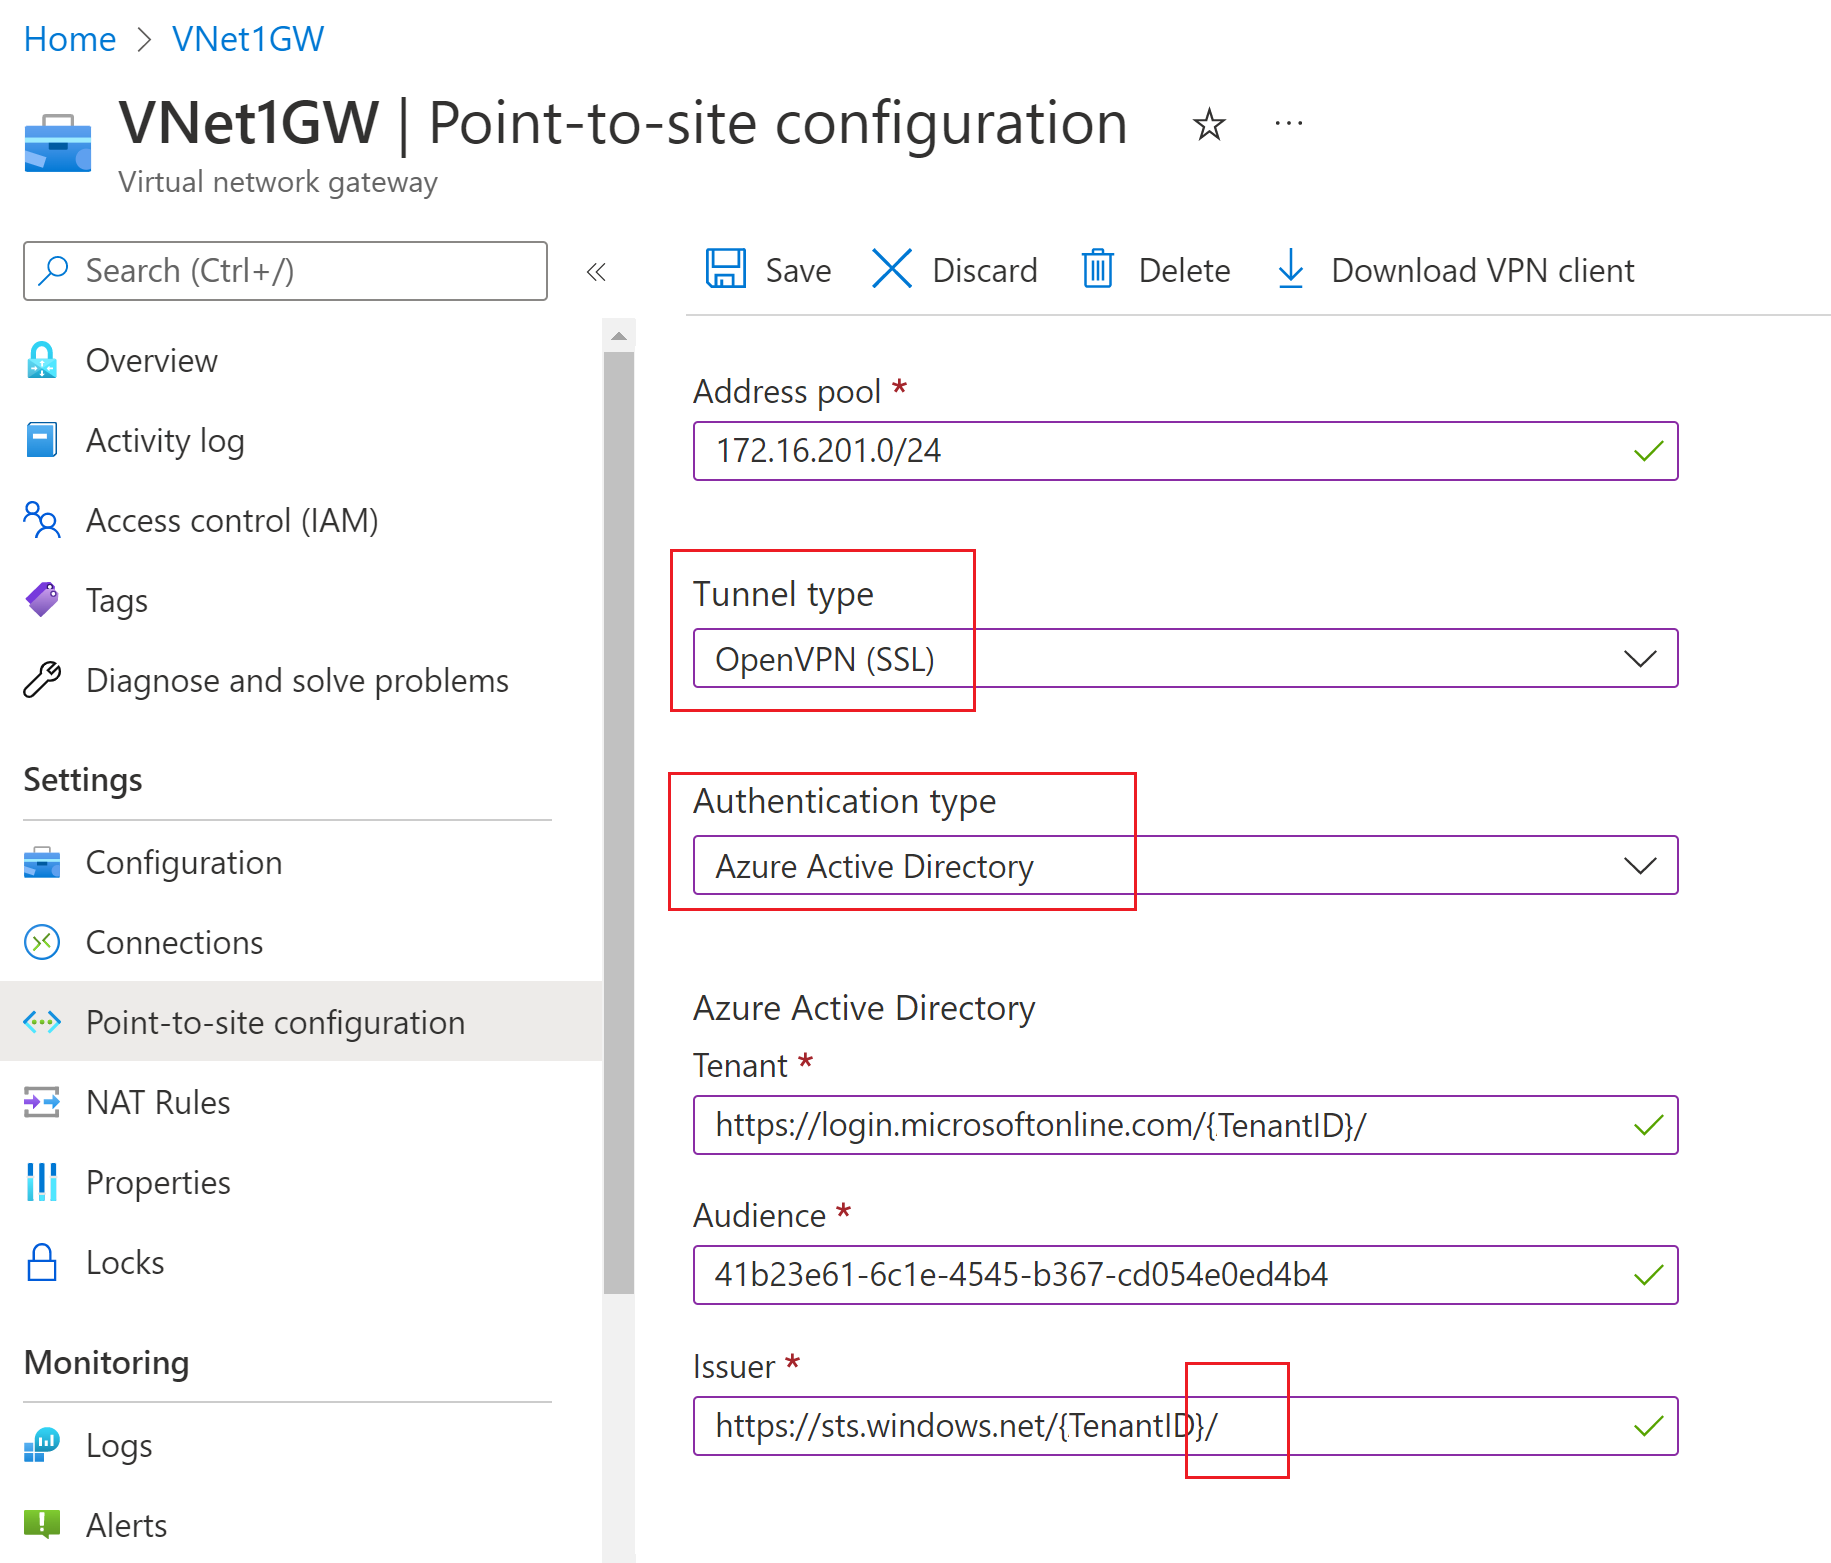 Screenshot showing settings for Tunnel type, Authentication type, and Azure Active Directory settings.